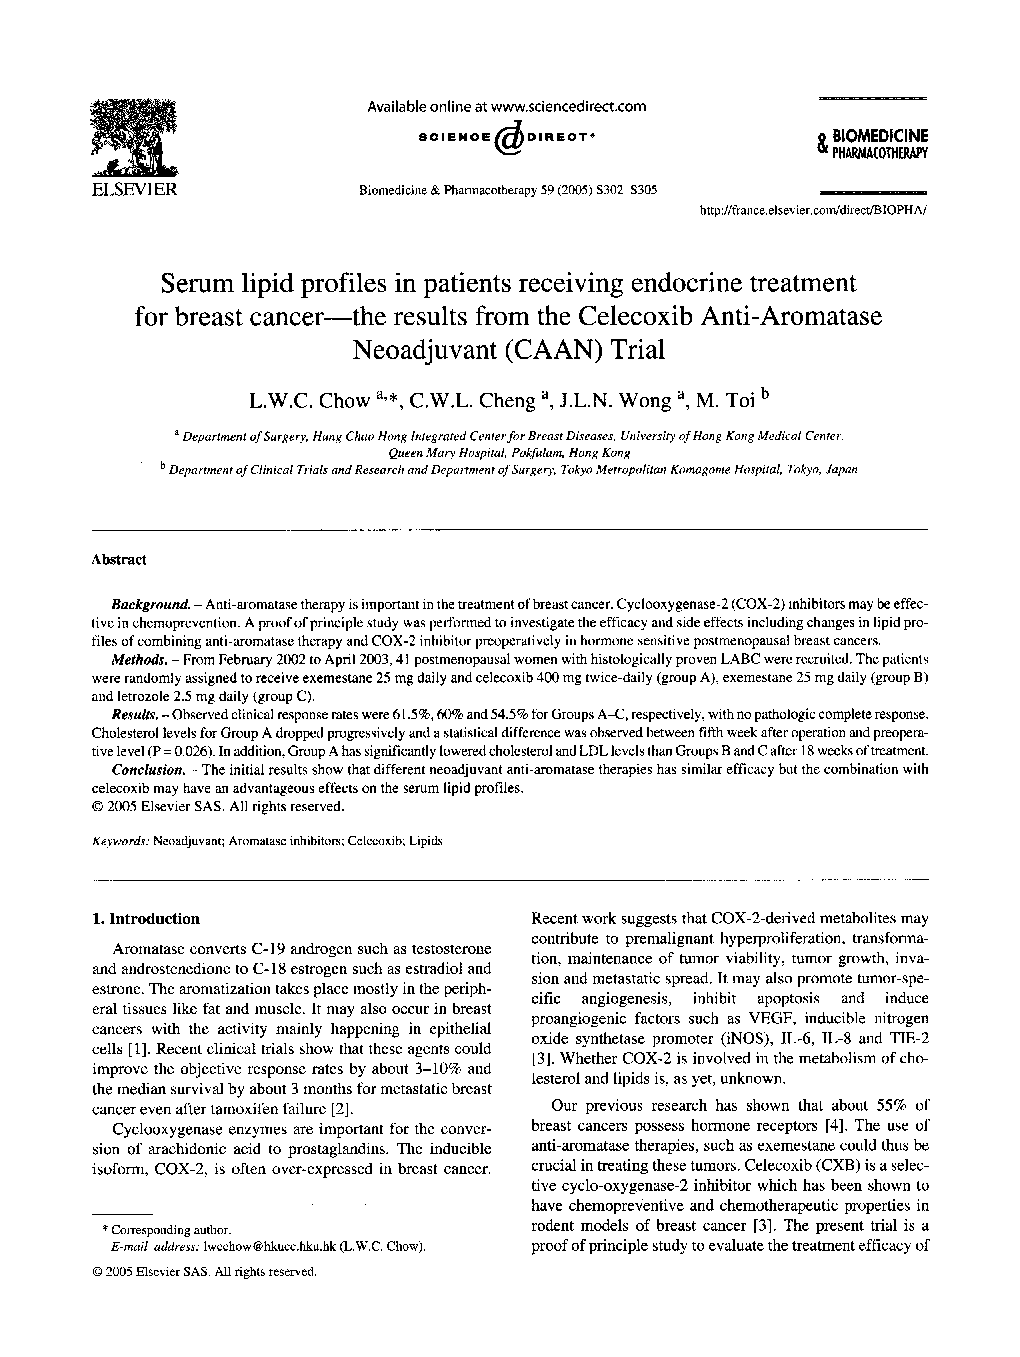 Serum lipid profiles in patients receiving endocrine treatment for breast cancer-the results from the Celecoxib Anti-Aromatase Neoadjuvant (CAAN) Trial